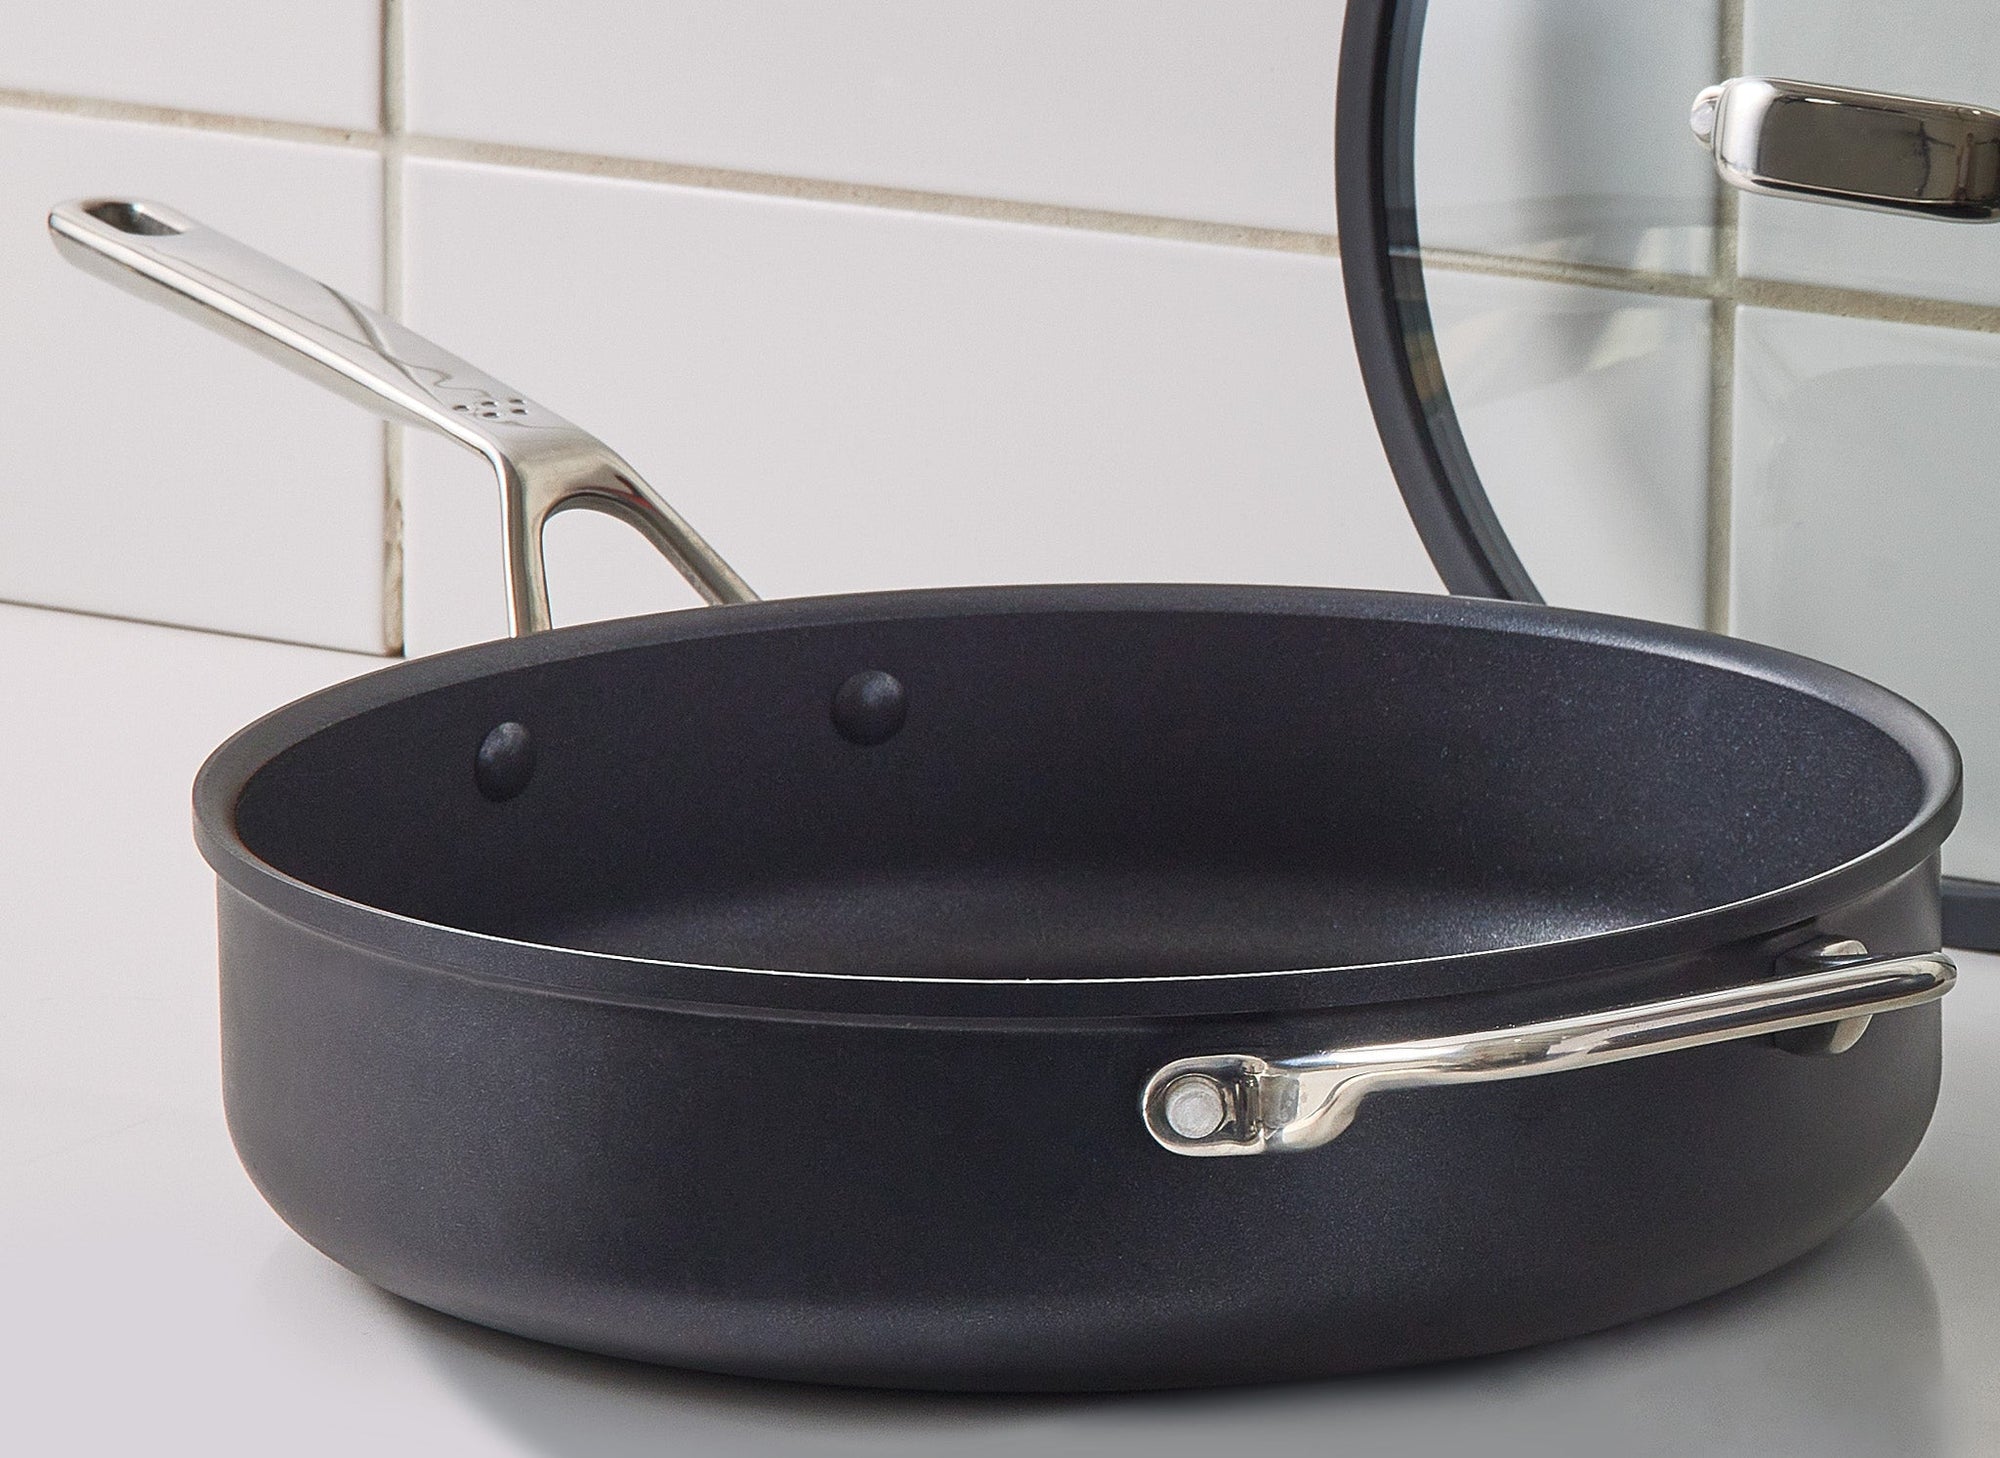 A side-angle view of the Misen 3 QT Nonstick Sauté Pan on a white kitchen counter. The pan’s lid rests against the wall at the edge of the counter.